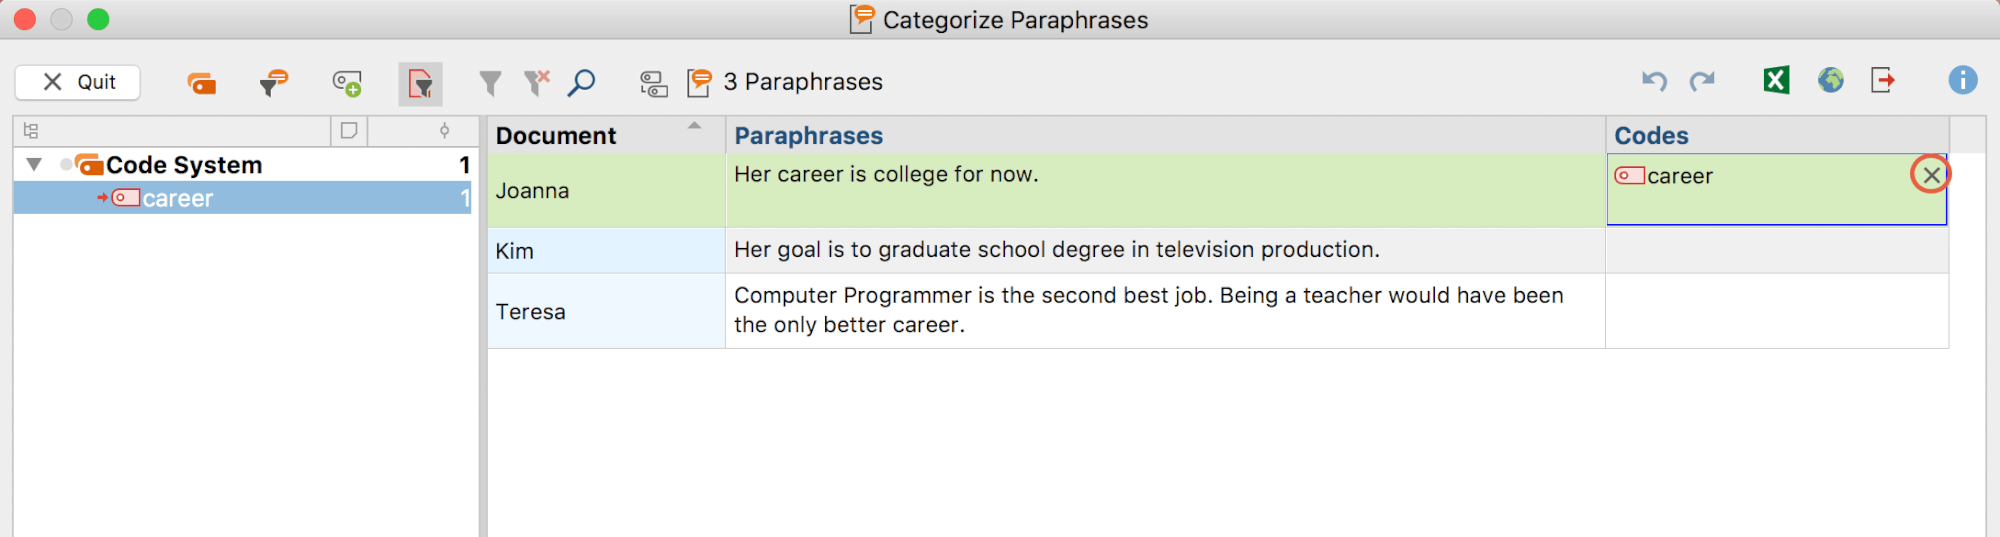 Removing a category assigned to a paraphrase